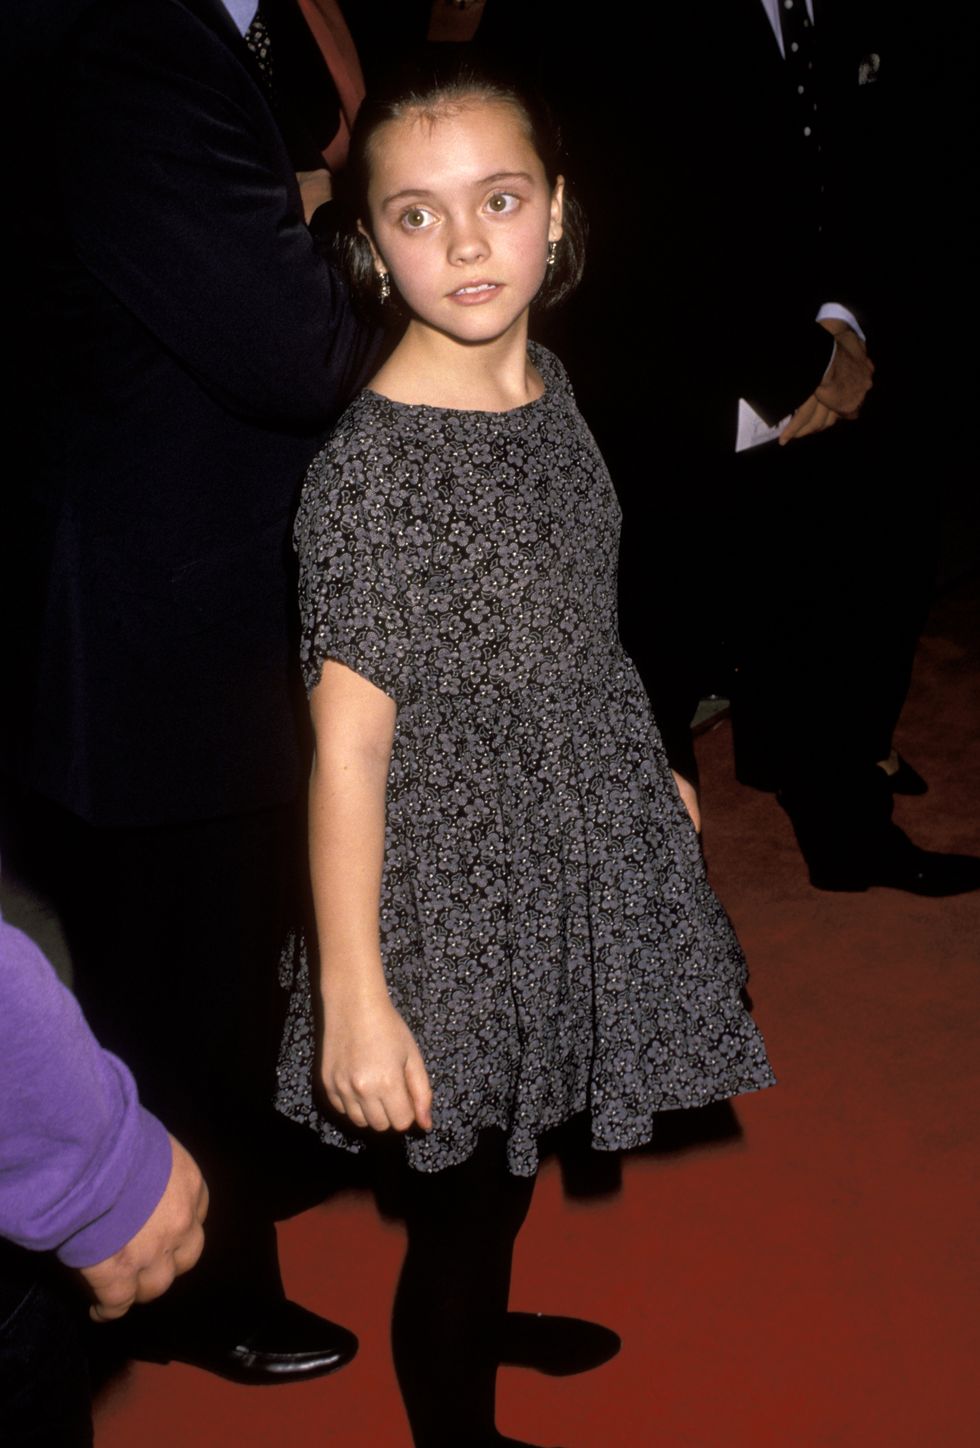 the addams family beverly hills premiere november 19, 1991